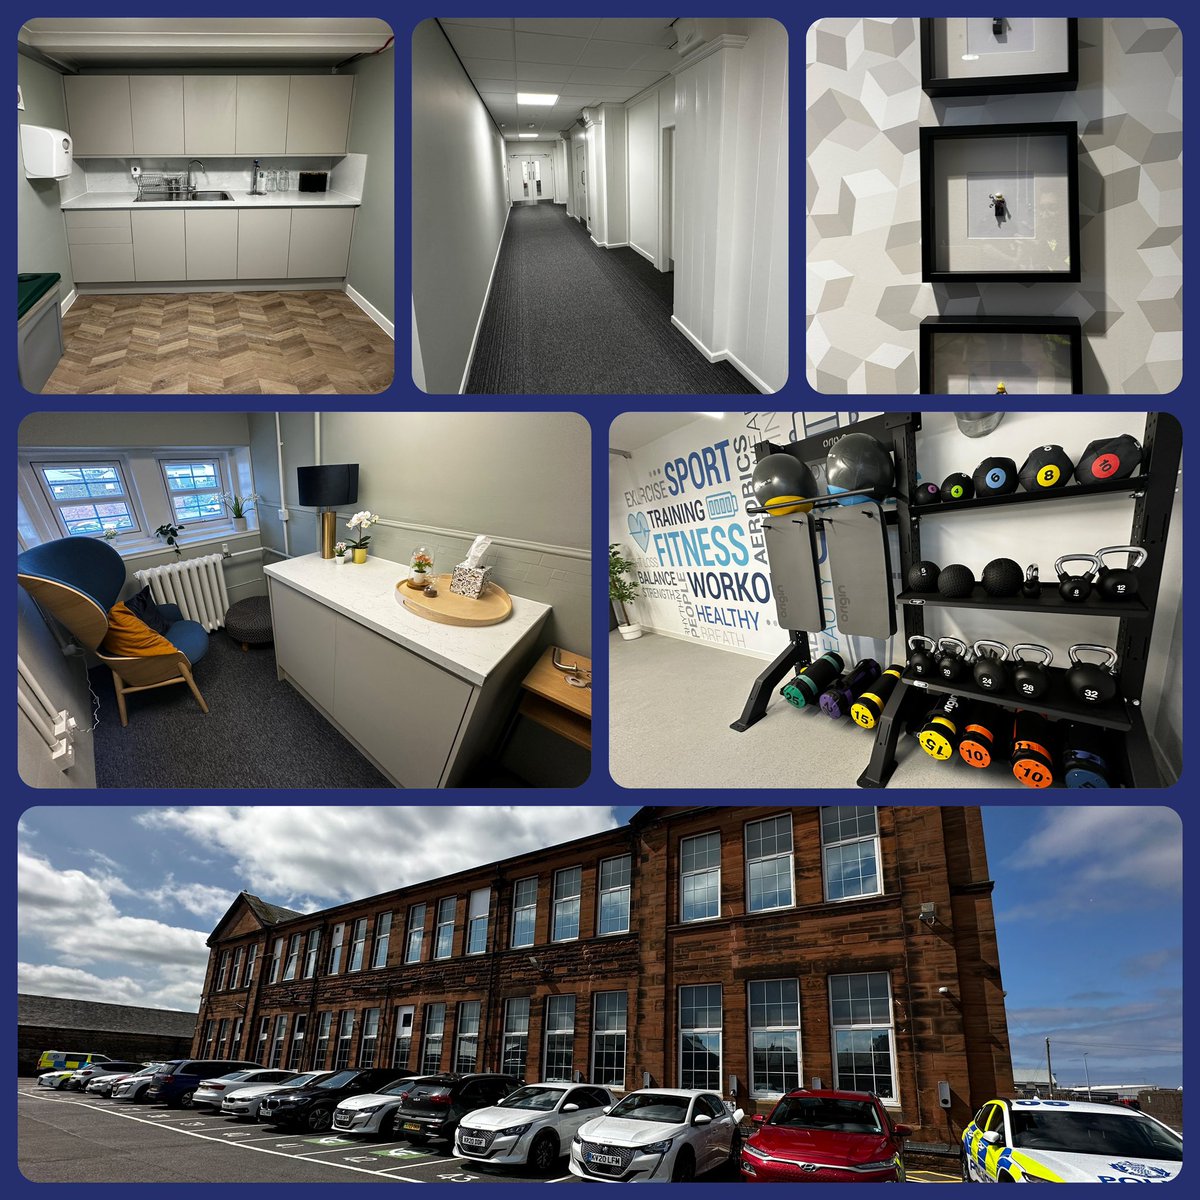 Yesterday was a proud moment as @CC_Livingstone formally opened our new Police Station in Ayr, @PSOSSAyrshire.

These photos capture the remarkable transformation, showcasing the upgraded and modernised work environment designed to support our hardworking & dedicated colleagues.